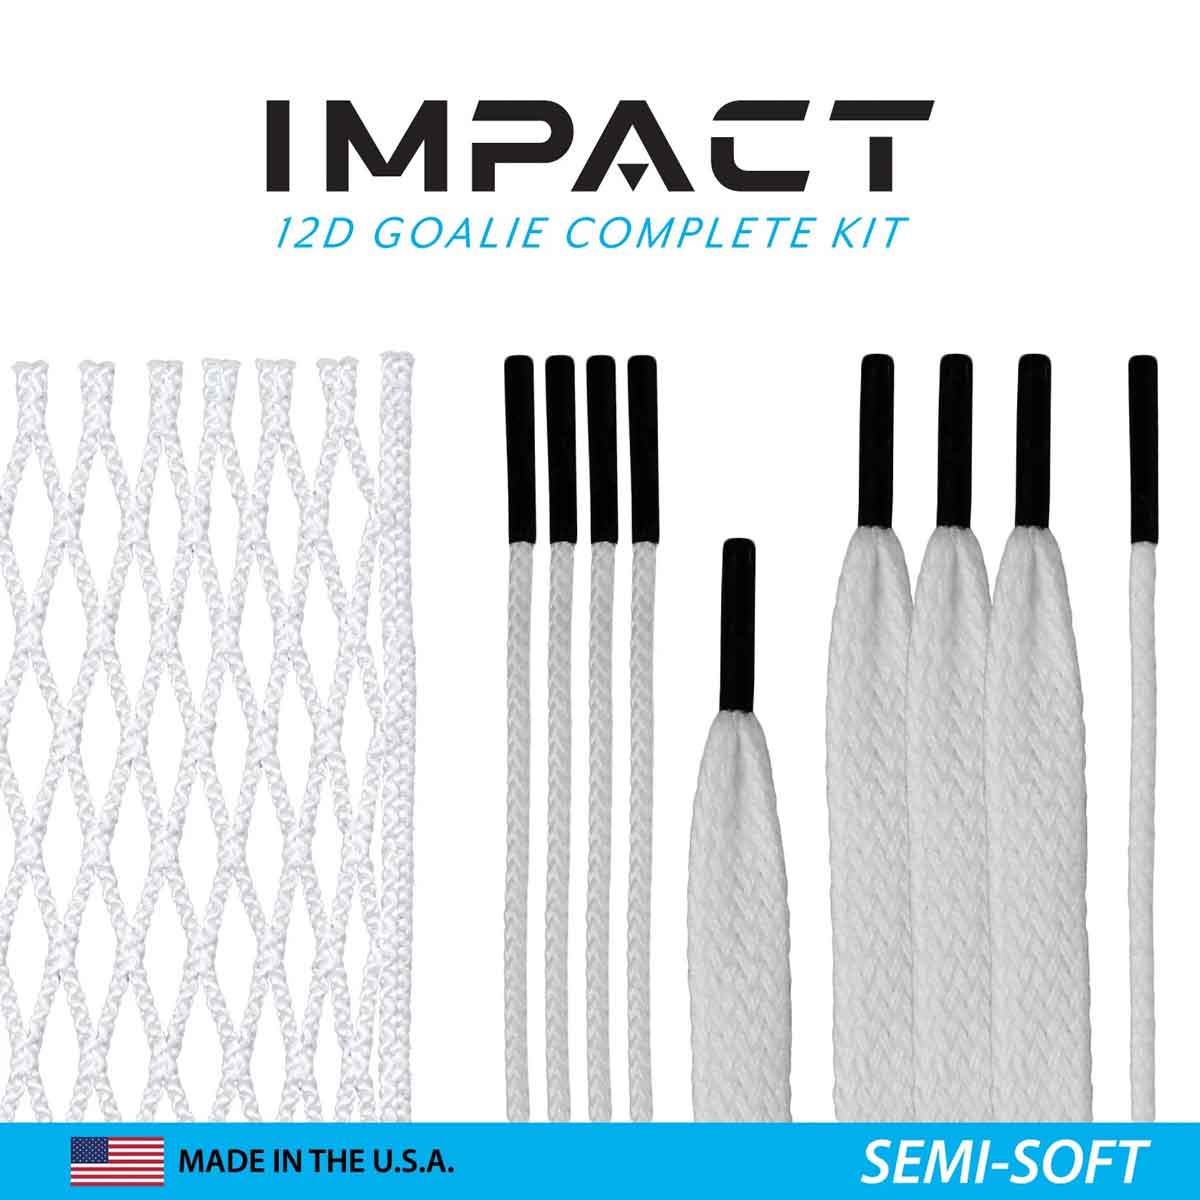 Picture of the semi-soft East Coast Dyes Impact Goalie Complete Lacrosse Mesh Kit